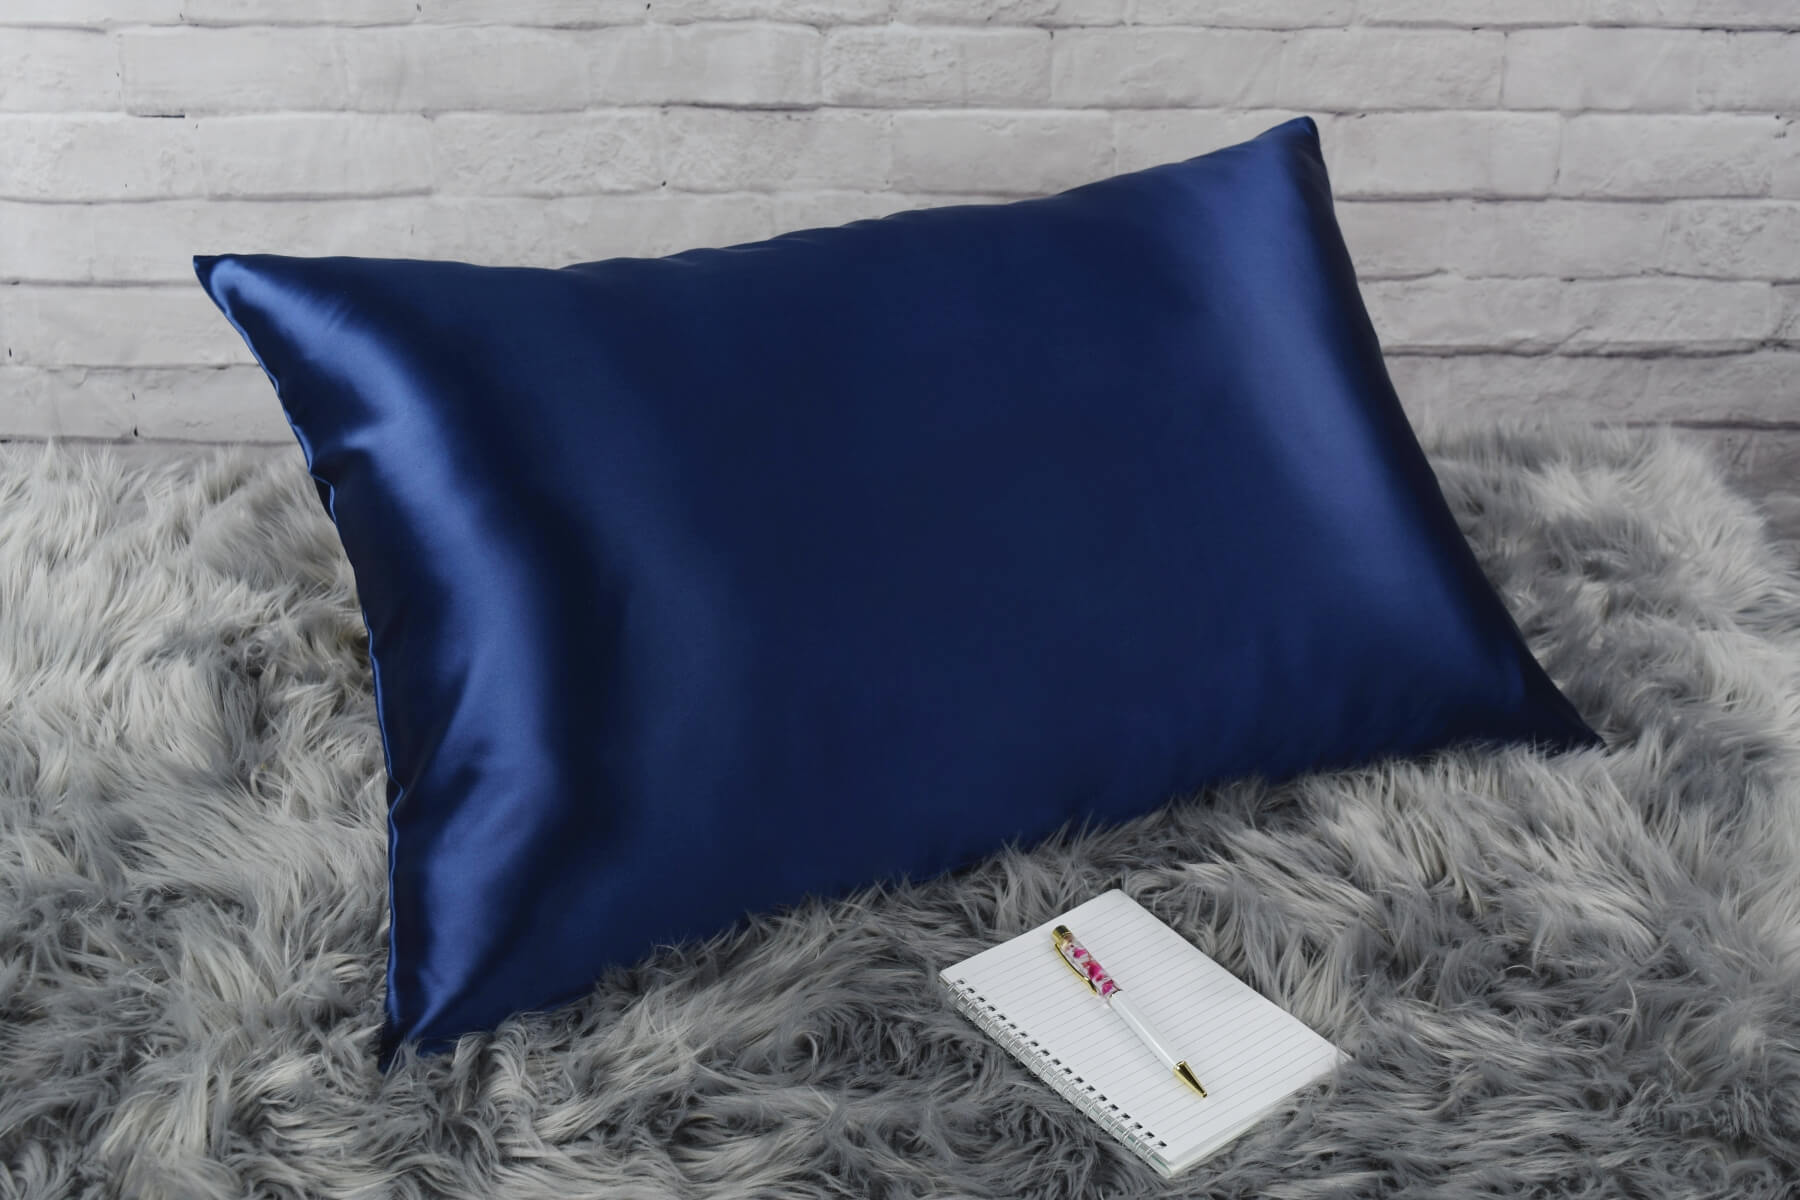 Celestial Silk 25 momme navy blue silk pillowcase on faux fur rug with notebook and pretty pen